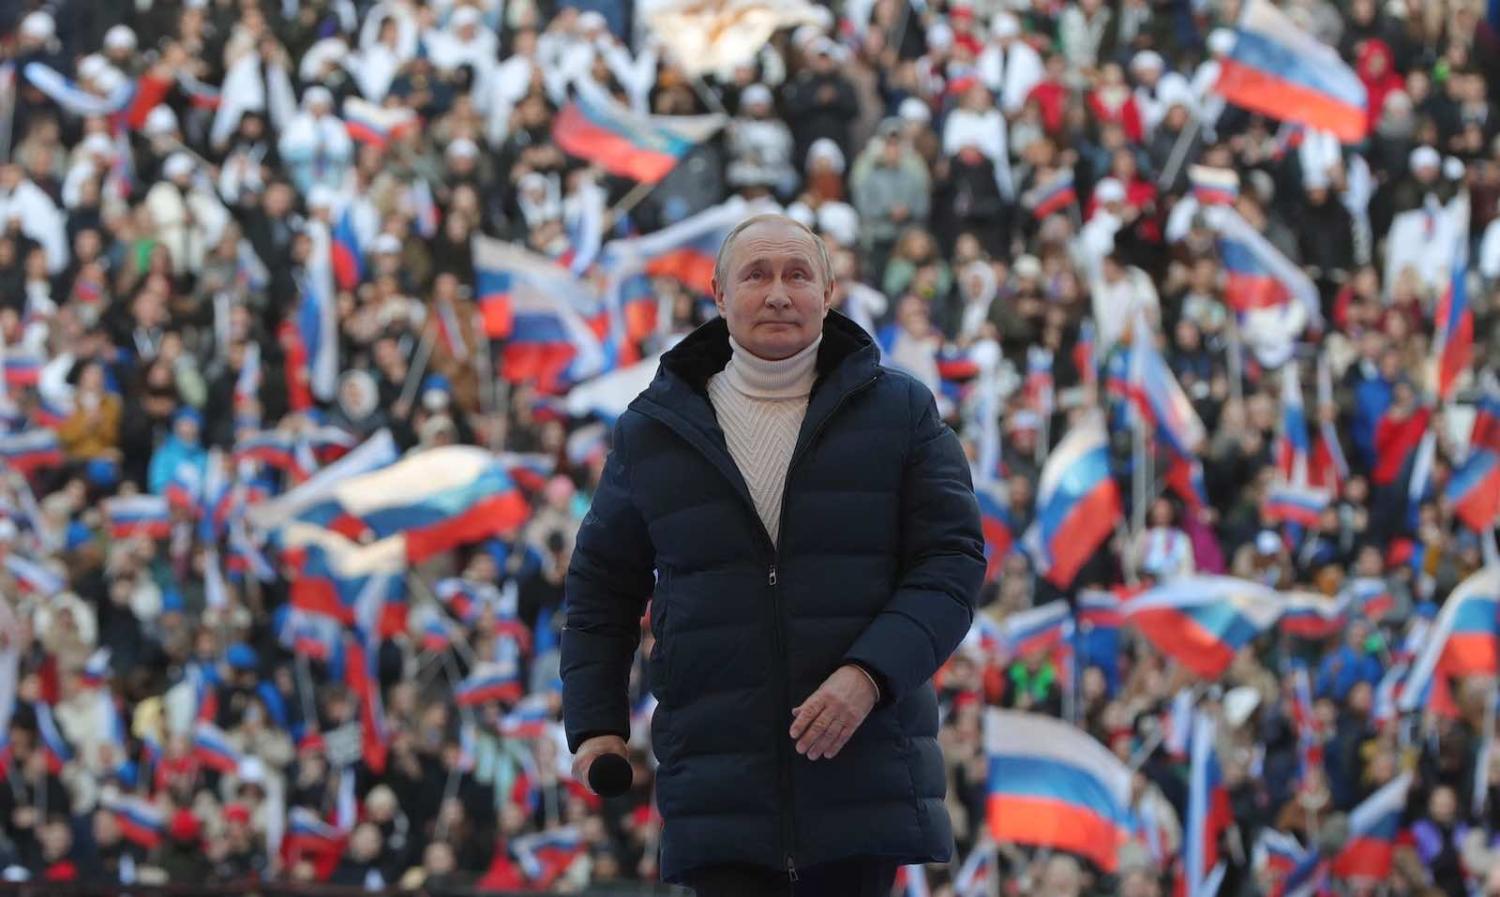 Russian President Vladimir Putin on 18 March during a concert at the Luzhniki stadium in Moscow marking eight years after Russia’s annexation of Crimea (Photo by Mikhail Klimentyev/Sputnik/AFP via Getty Images)